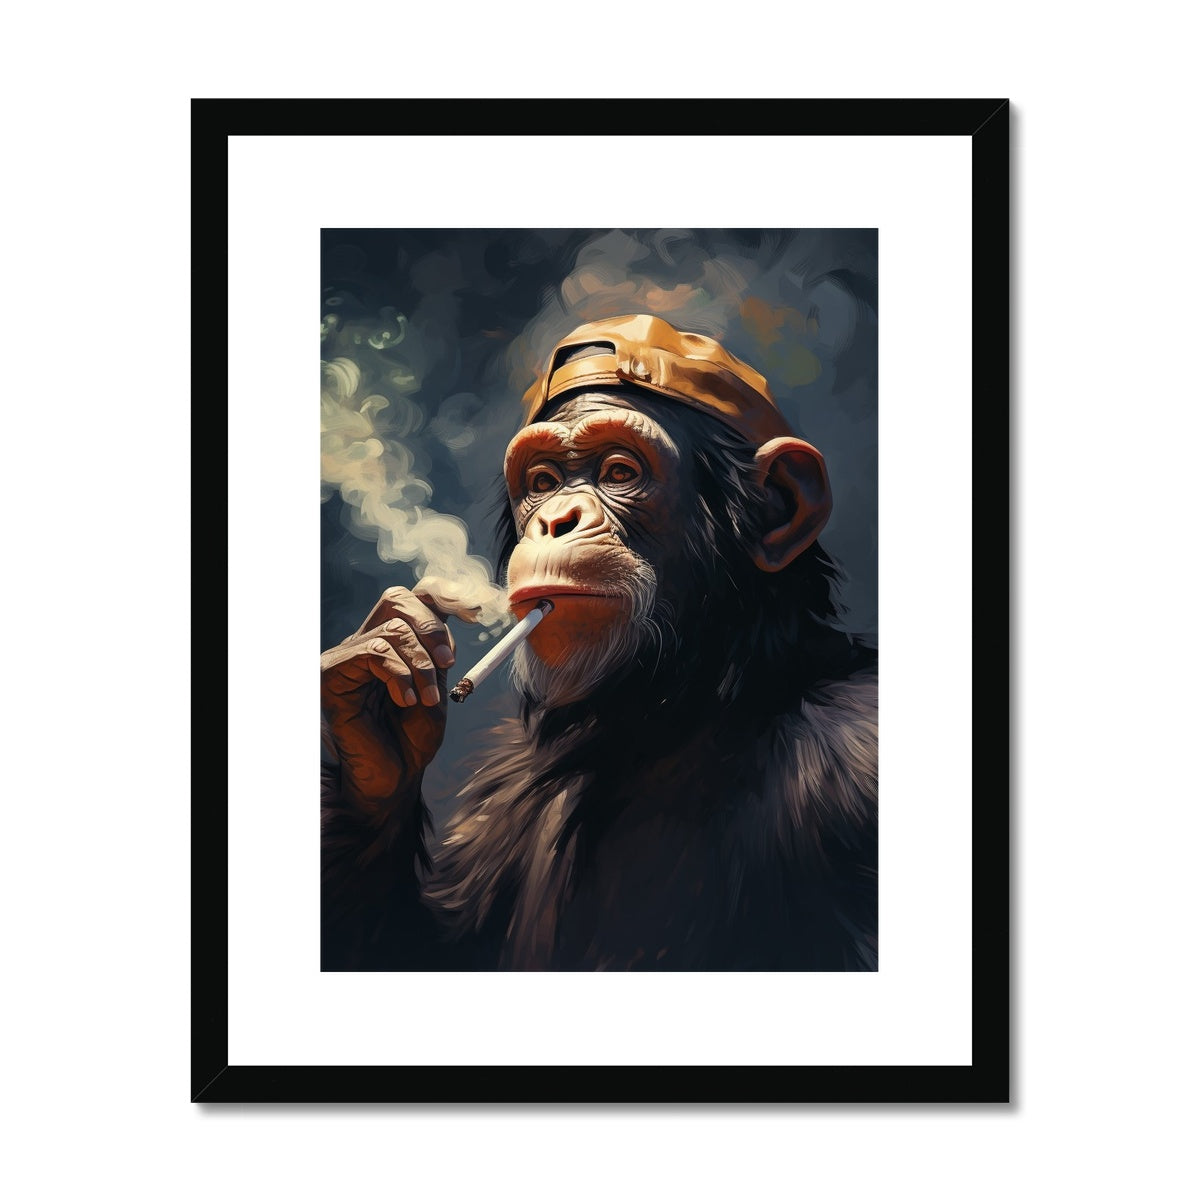 The Don of Bangkok: Limited Edition Framed & Mounted Print